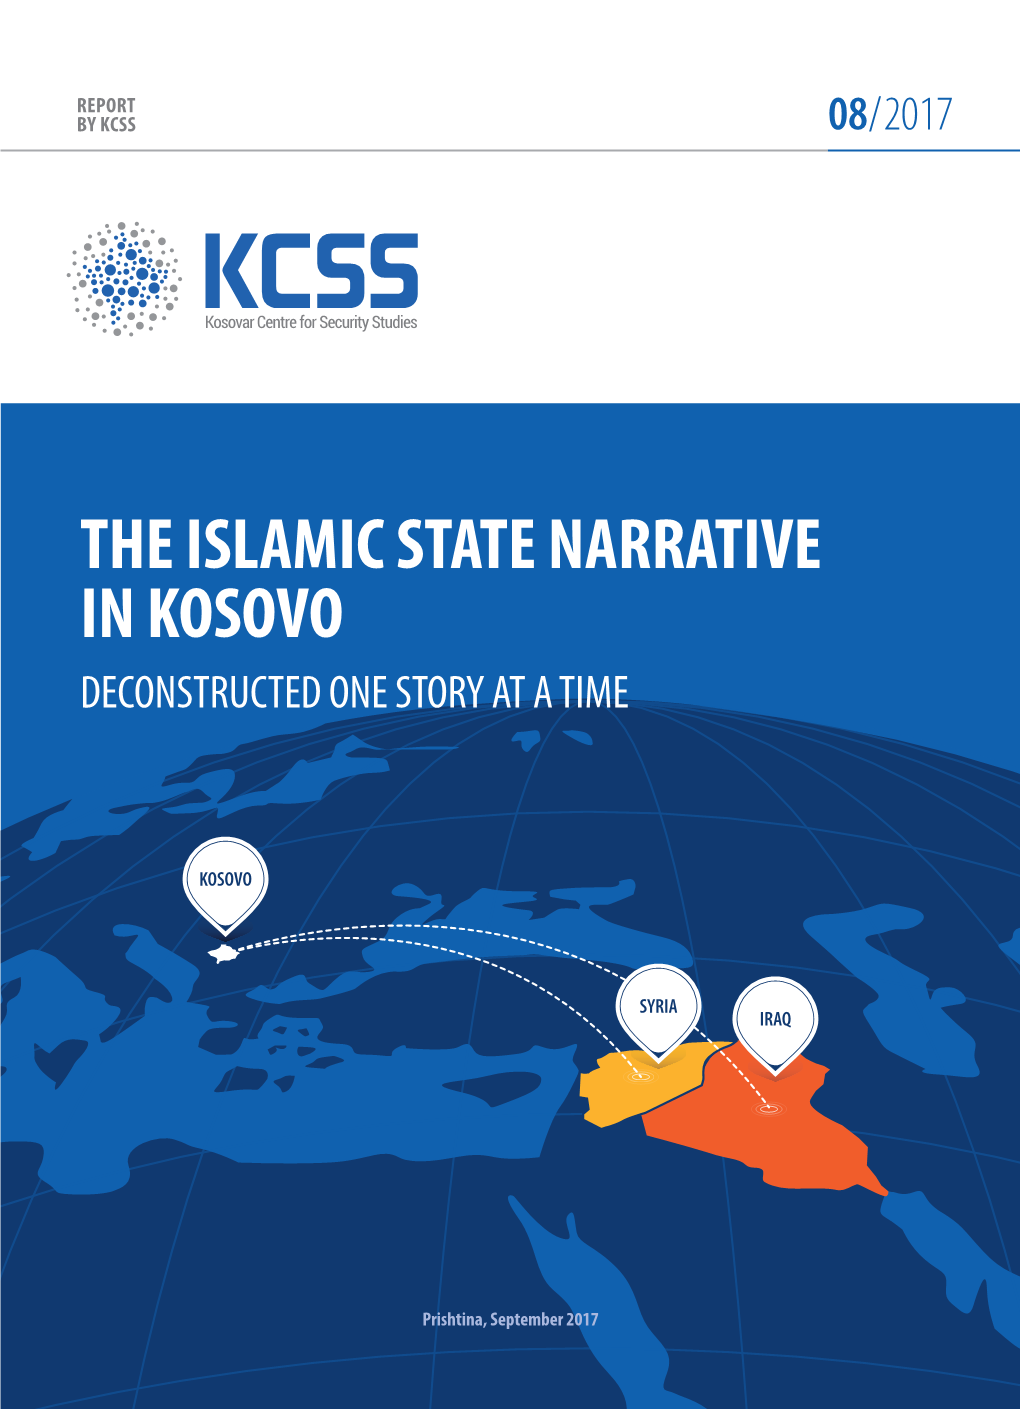 The Islamic State Narrative in Kosovo Deconstructed One Story at a Time